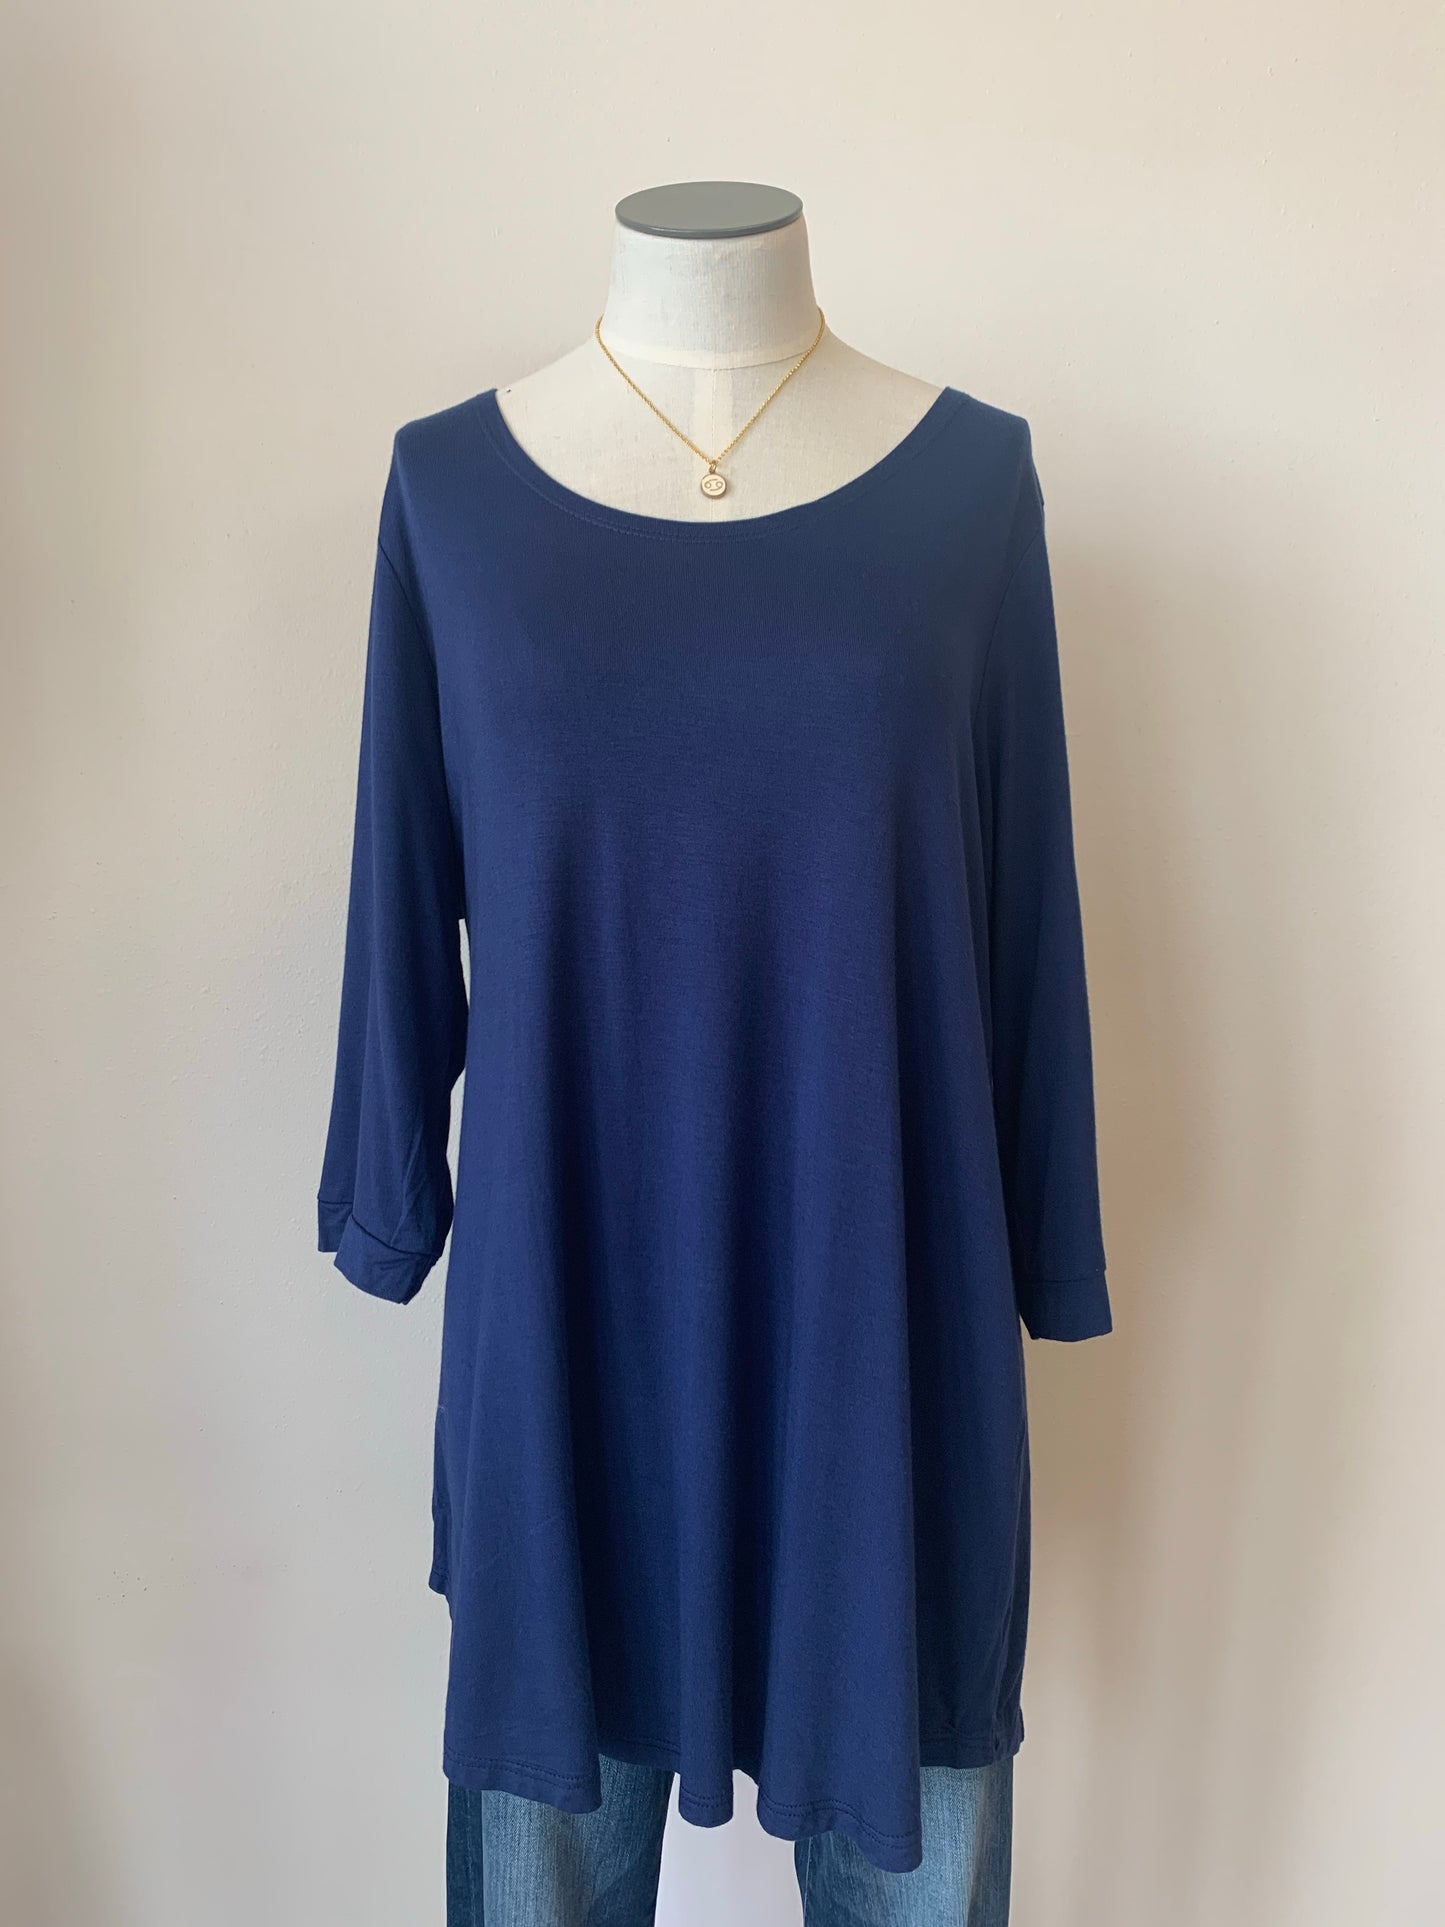 3/4 cuffed sleeve knit top plus size